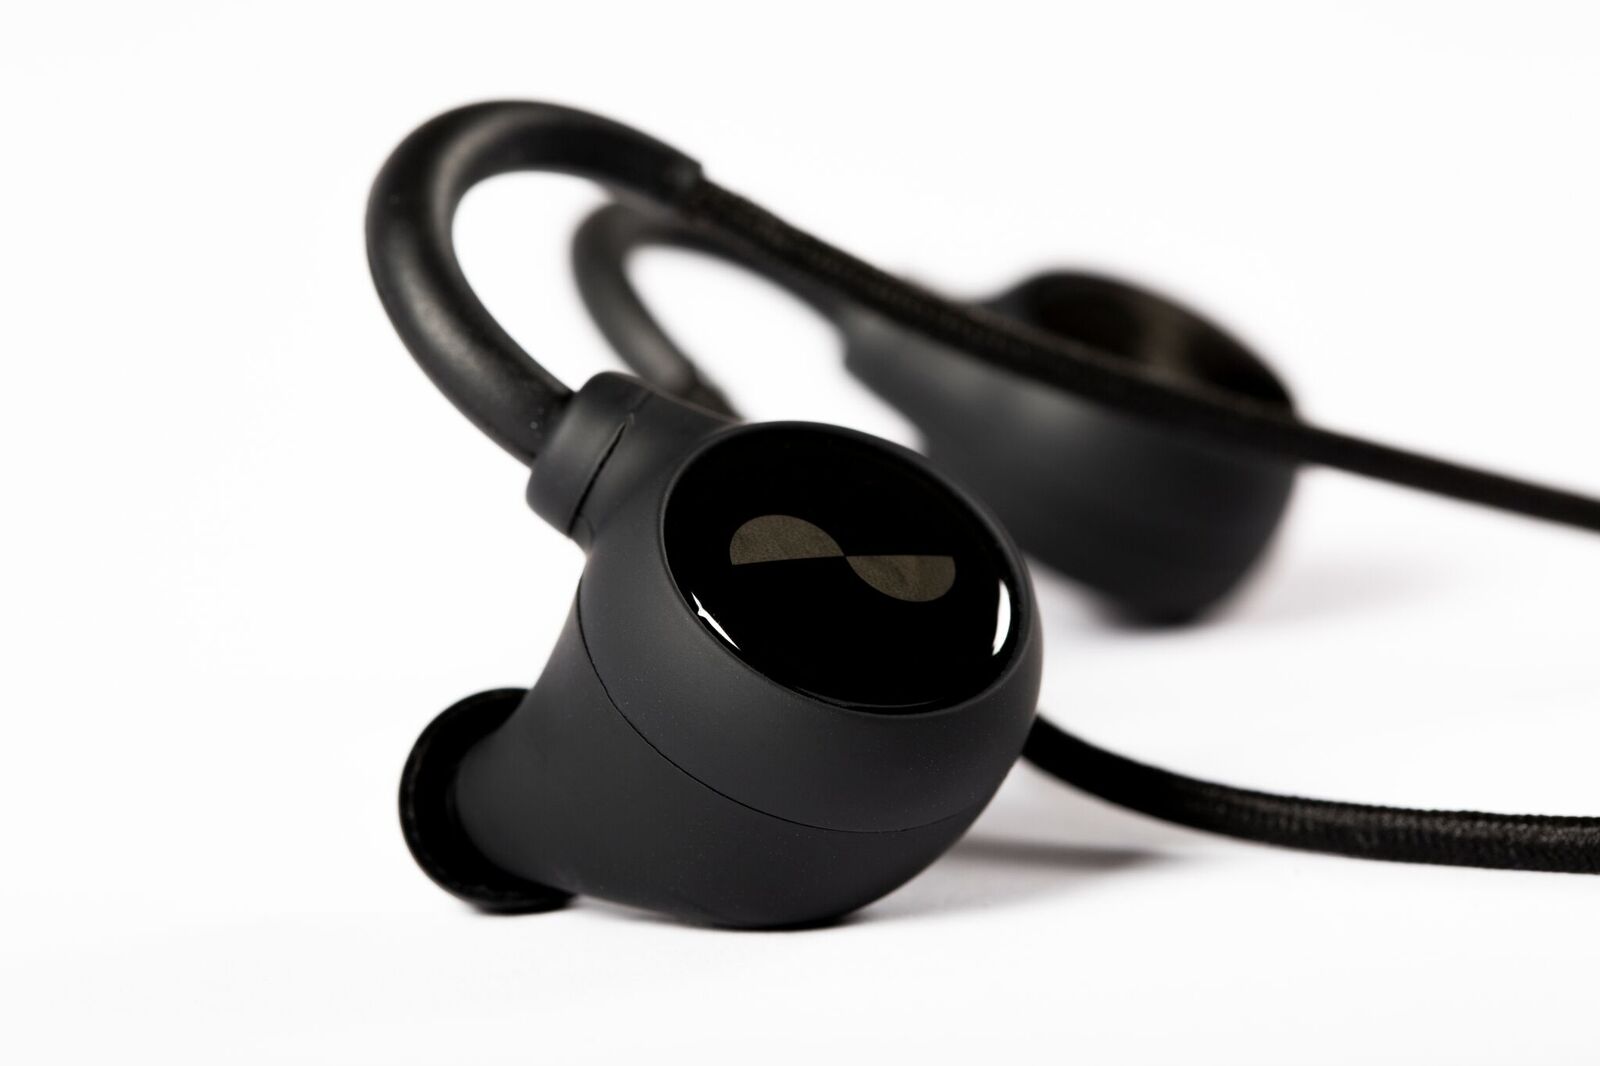 Nura’s Adaptive Technology Now in Bluetooth Earbuds